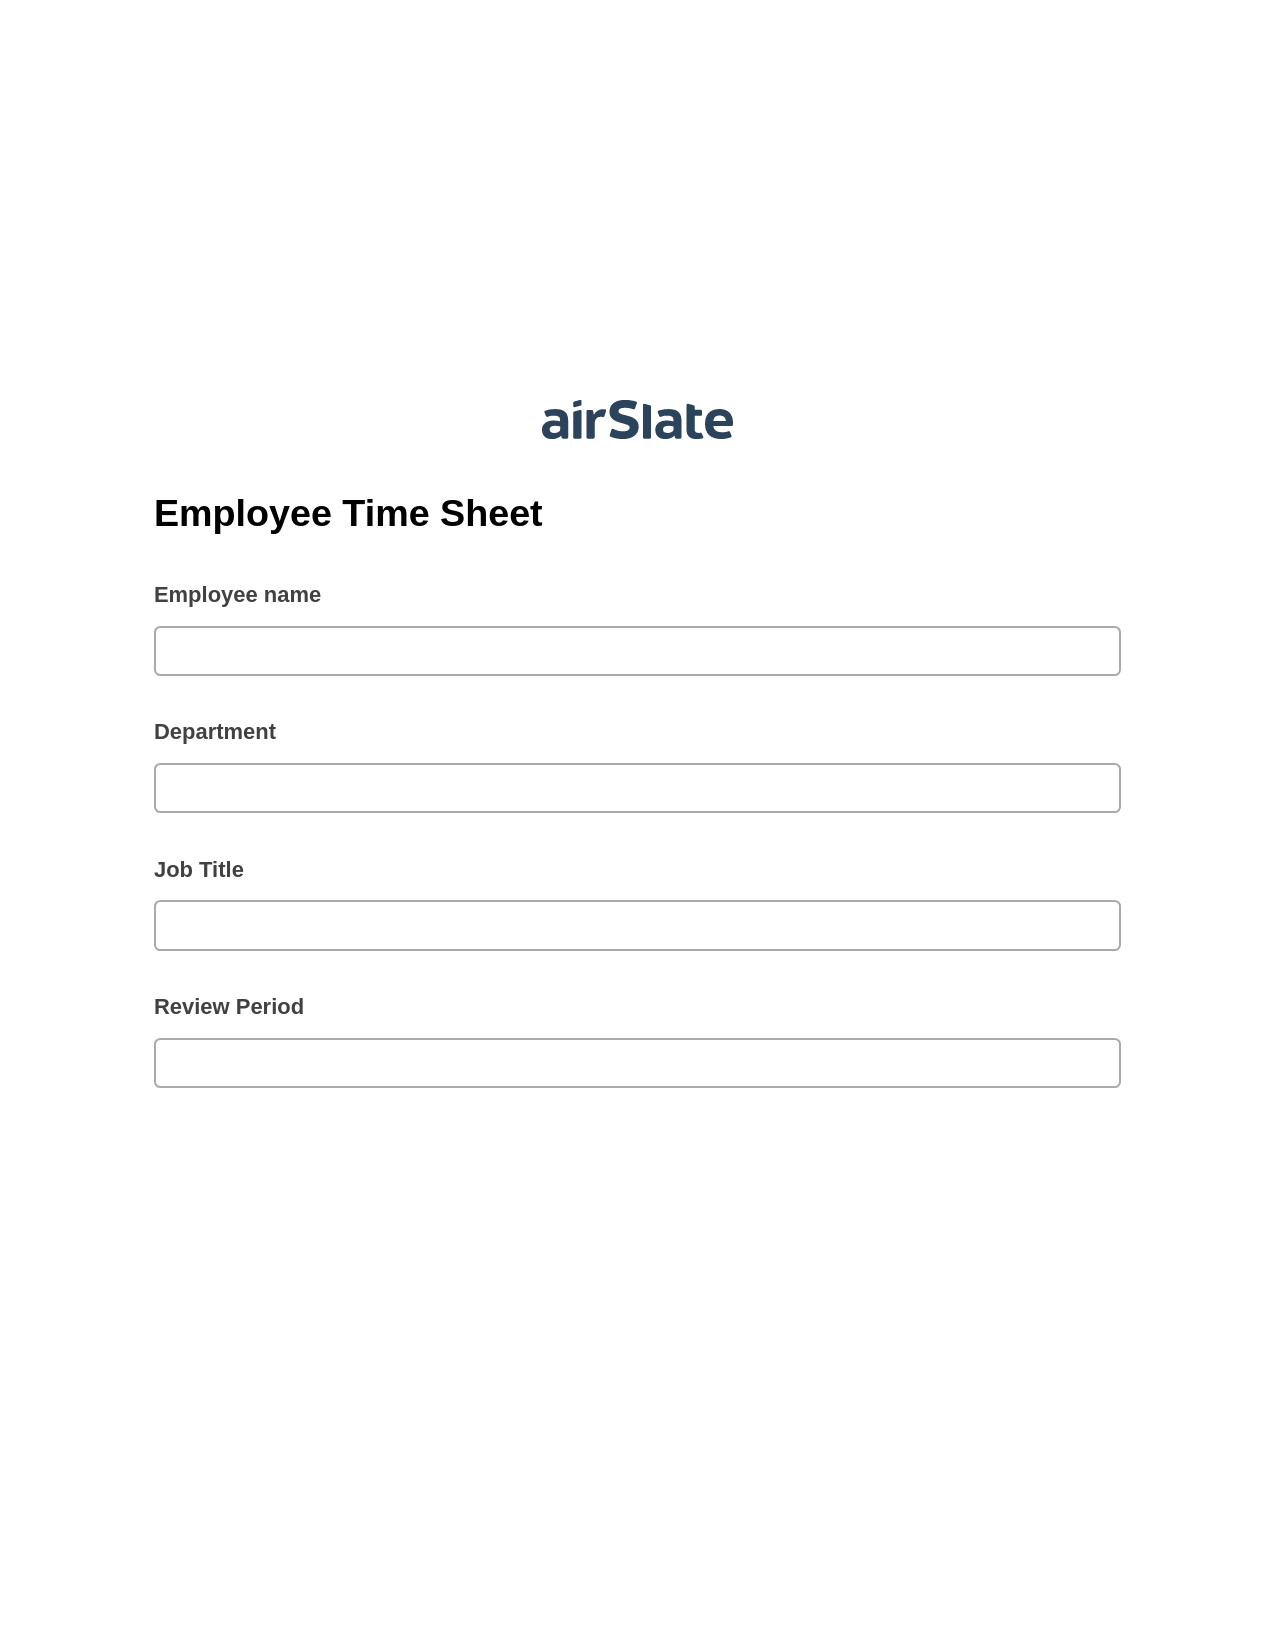 Multirole Employee Time Sheet Pre-fill Dropdowns from CSV file Bot, Remove Tags From Slate Bot, Archive to Box Bot